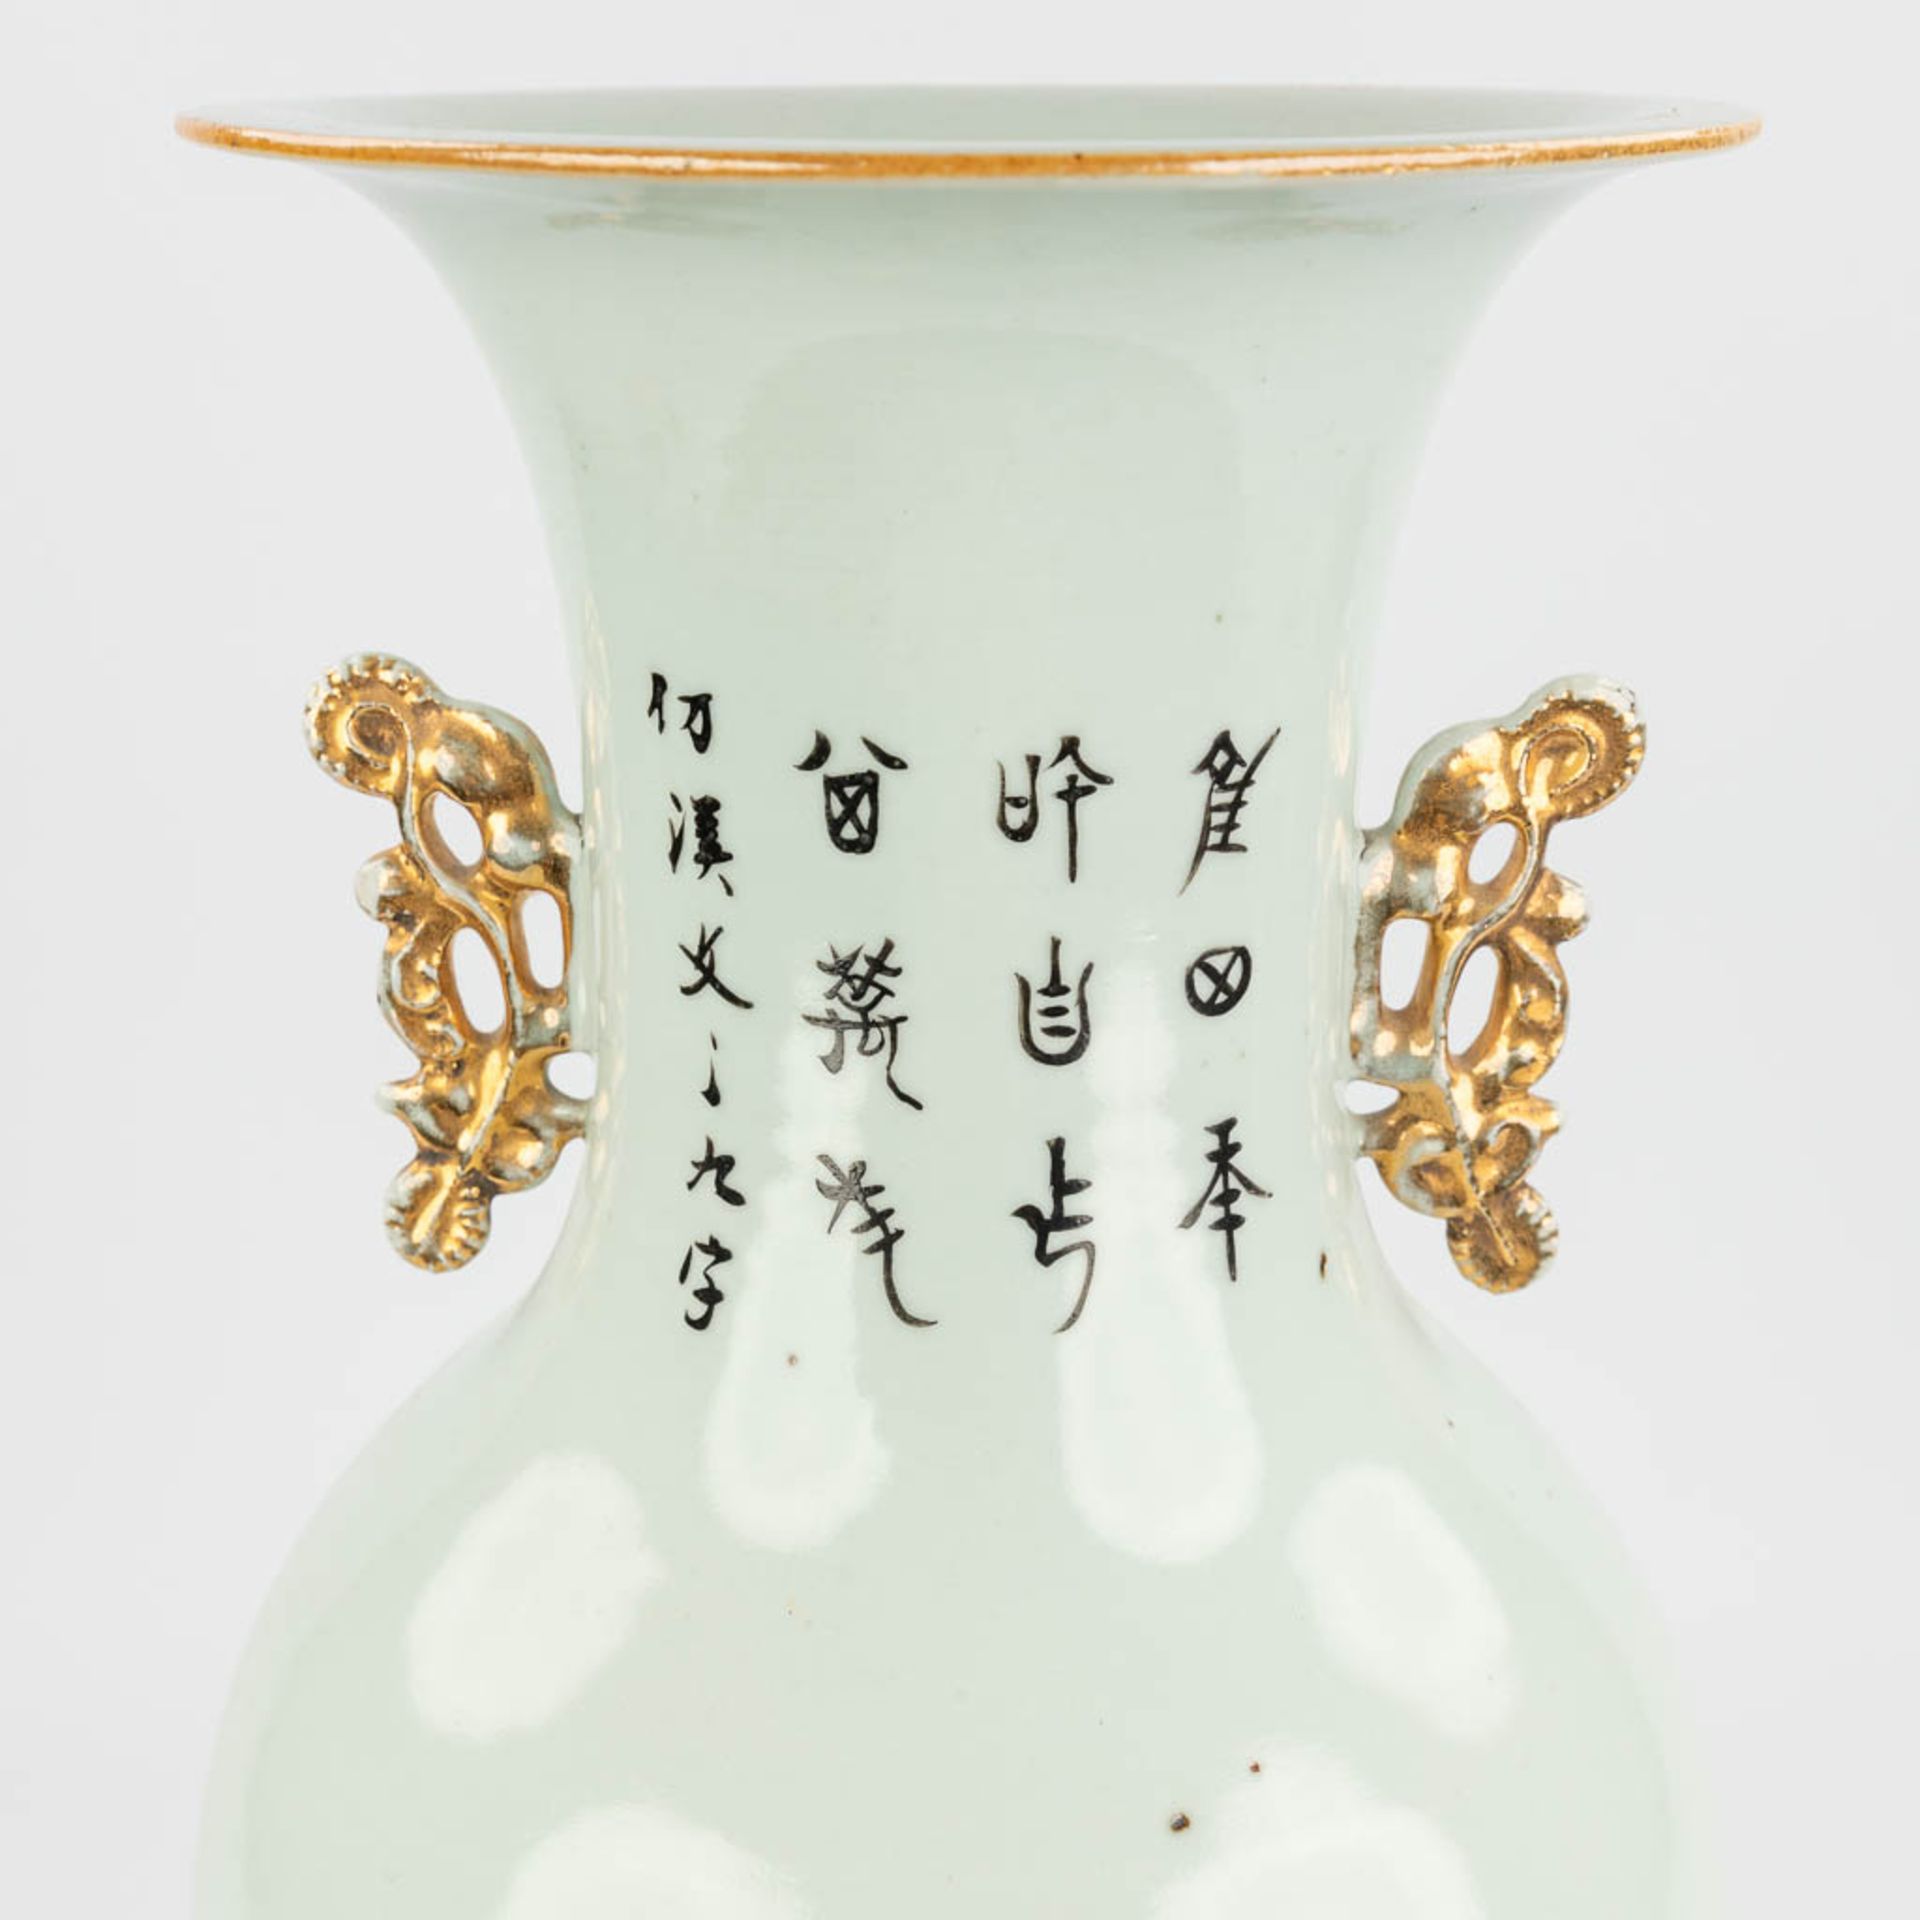 A Chinese vase made of porcelain andÊdecor of ladies near a large rock. (57,5 x 23 cm) - Image 6 of 13